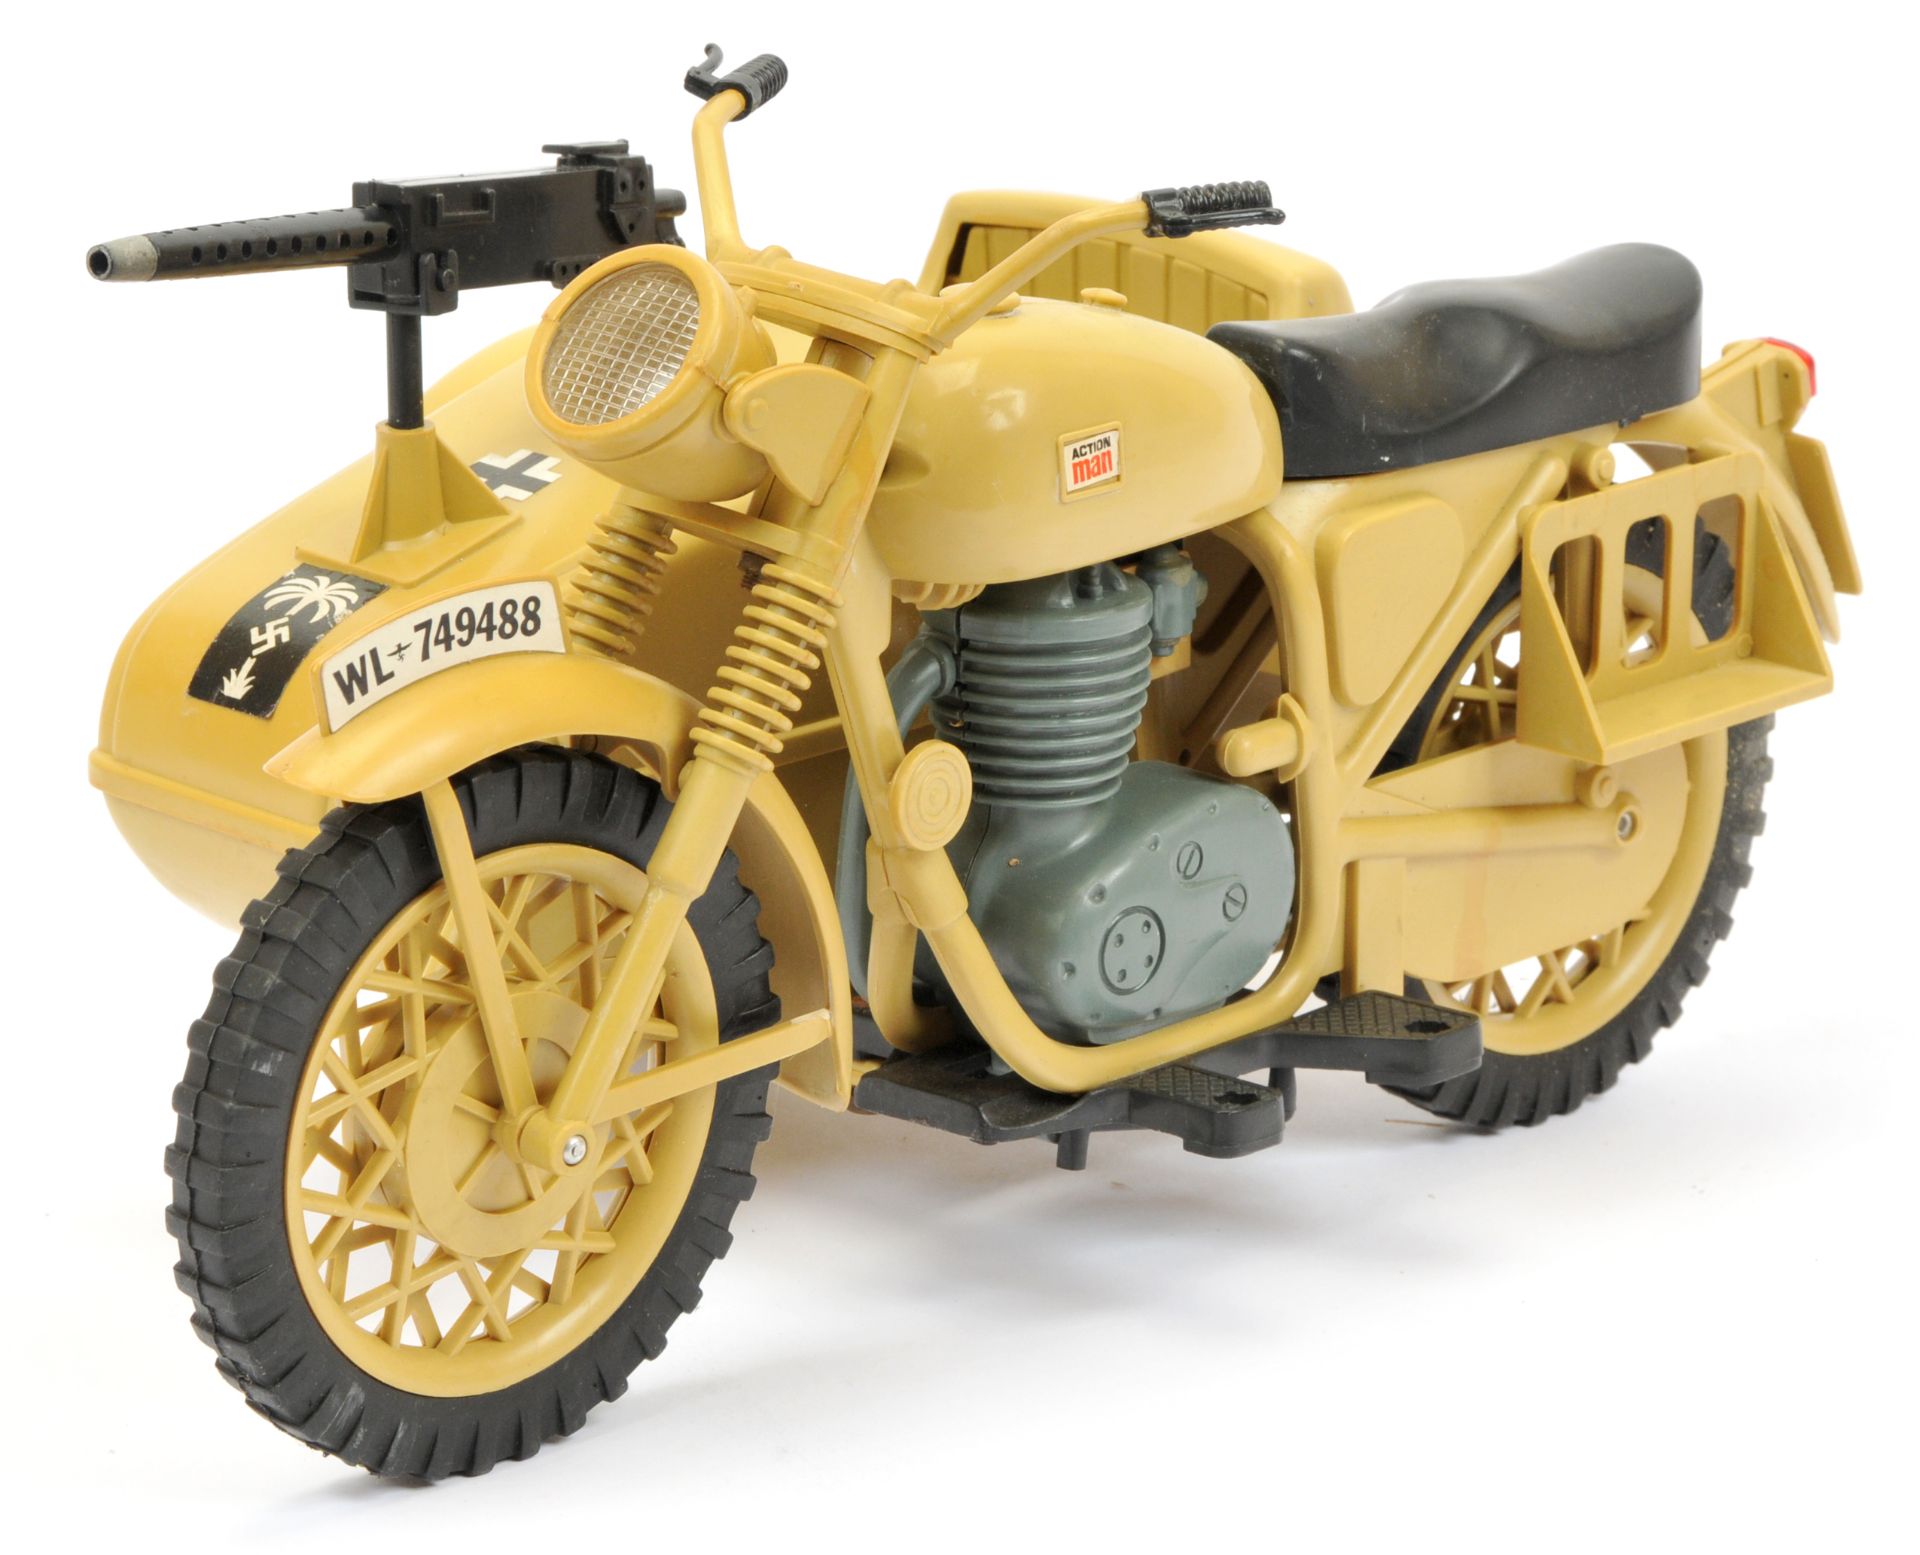 Palitoy Action Man German Motorcycle and Sidecar, includes machine gun, Good Plus, unboxed. - Bild 3 aus 3